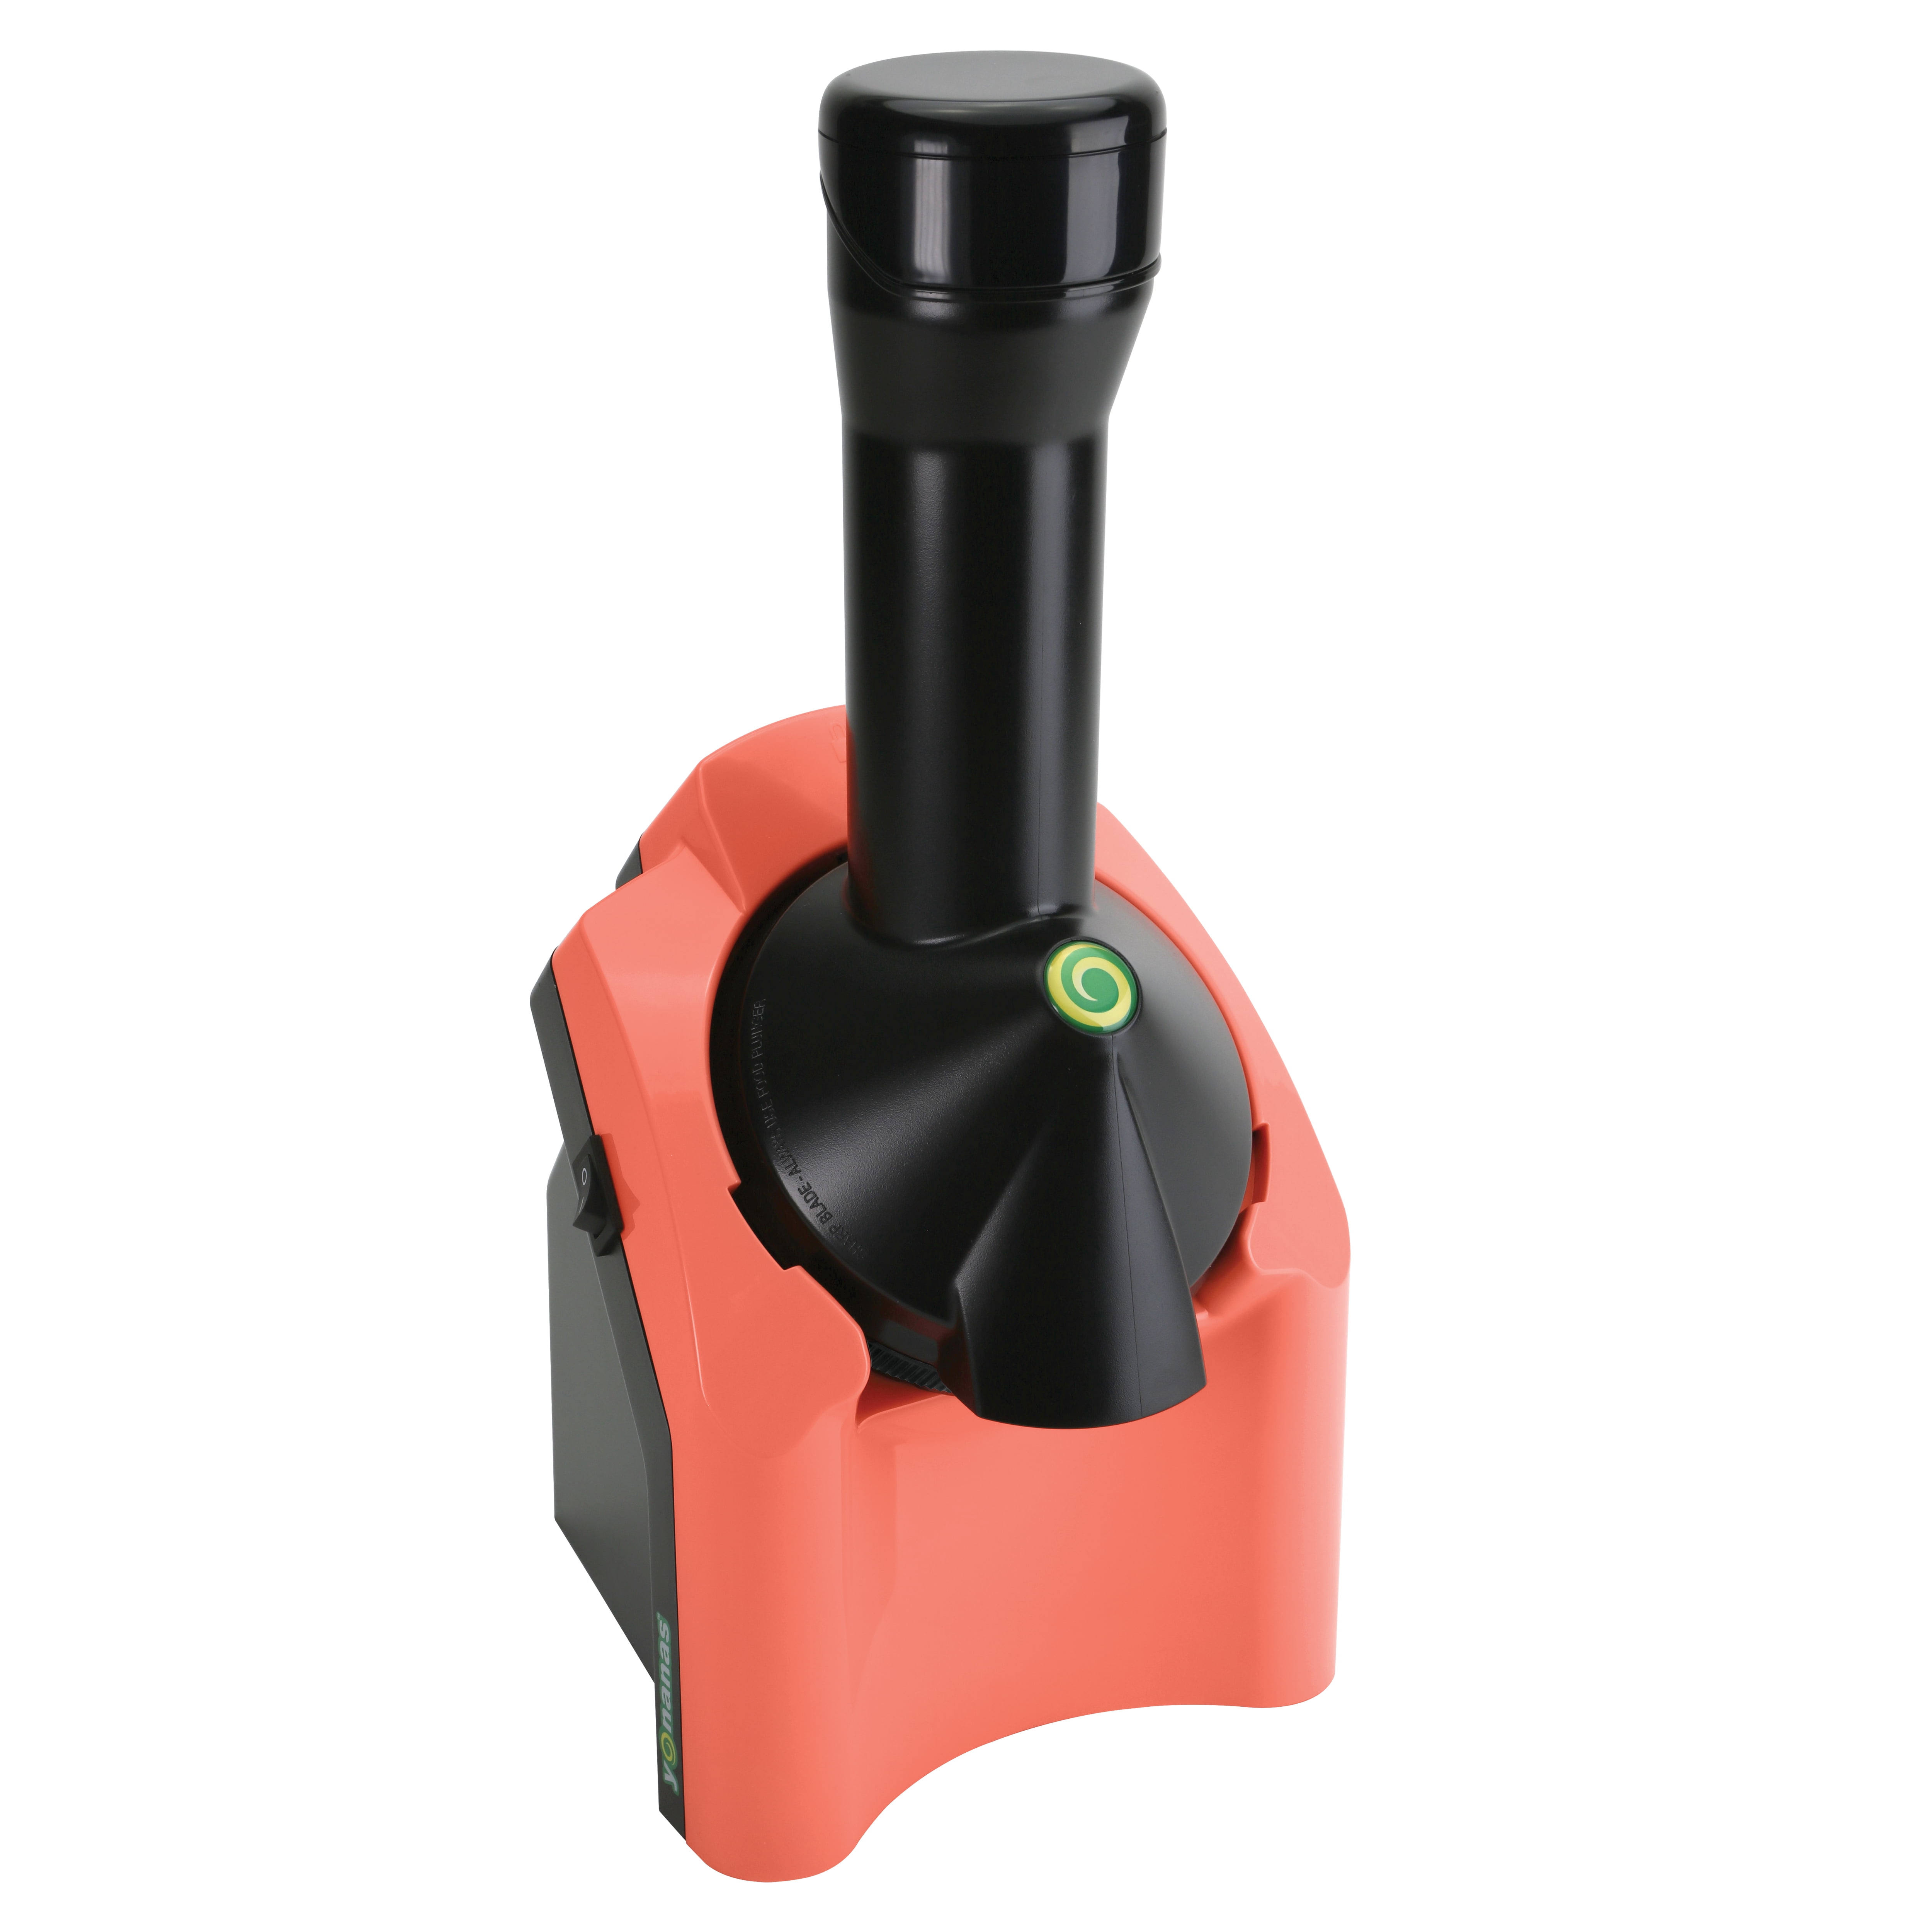 Yonanas Review: I tried this fruit soft serve machine—here's what